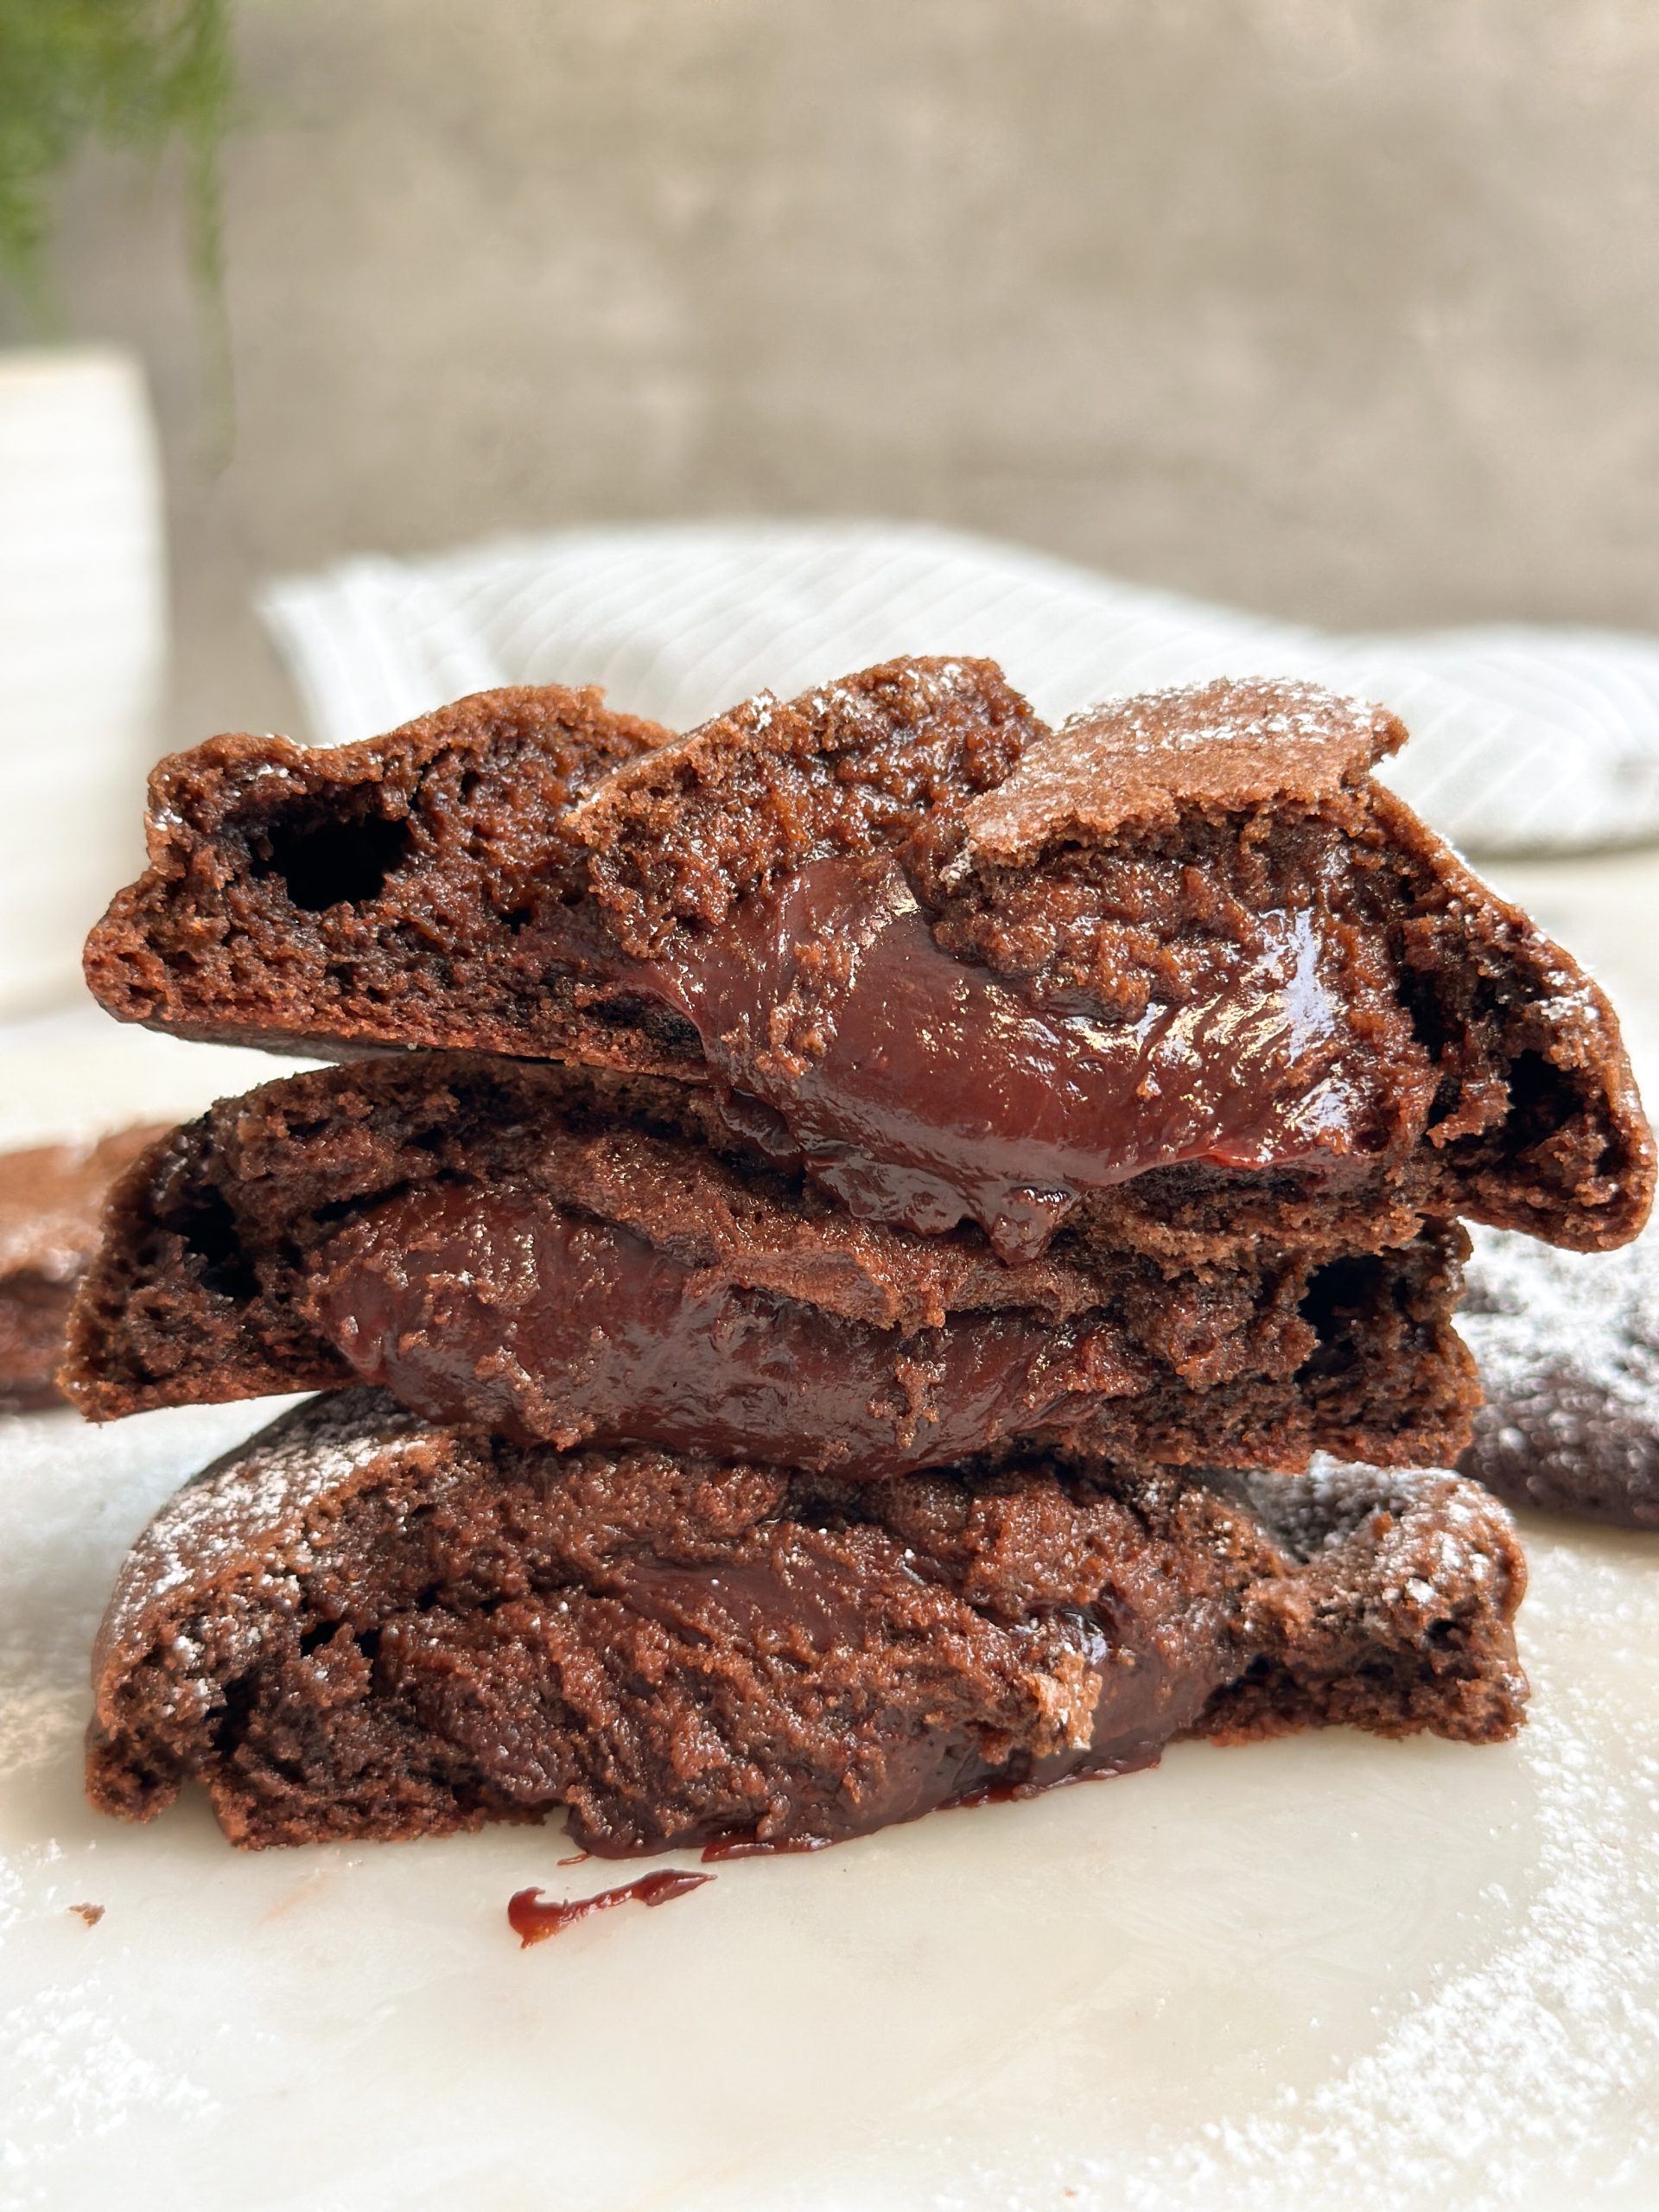 3 halves of chocolate lava cookies stacked on top of each other revealing molten interior